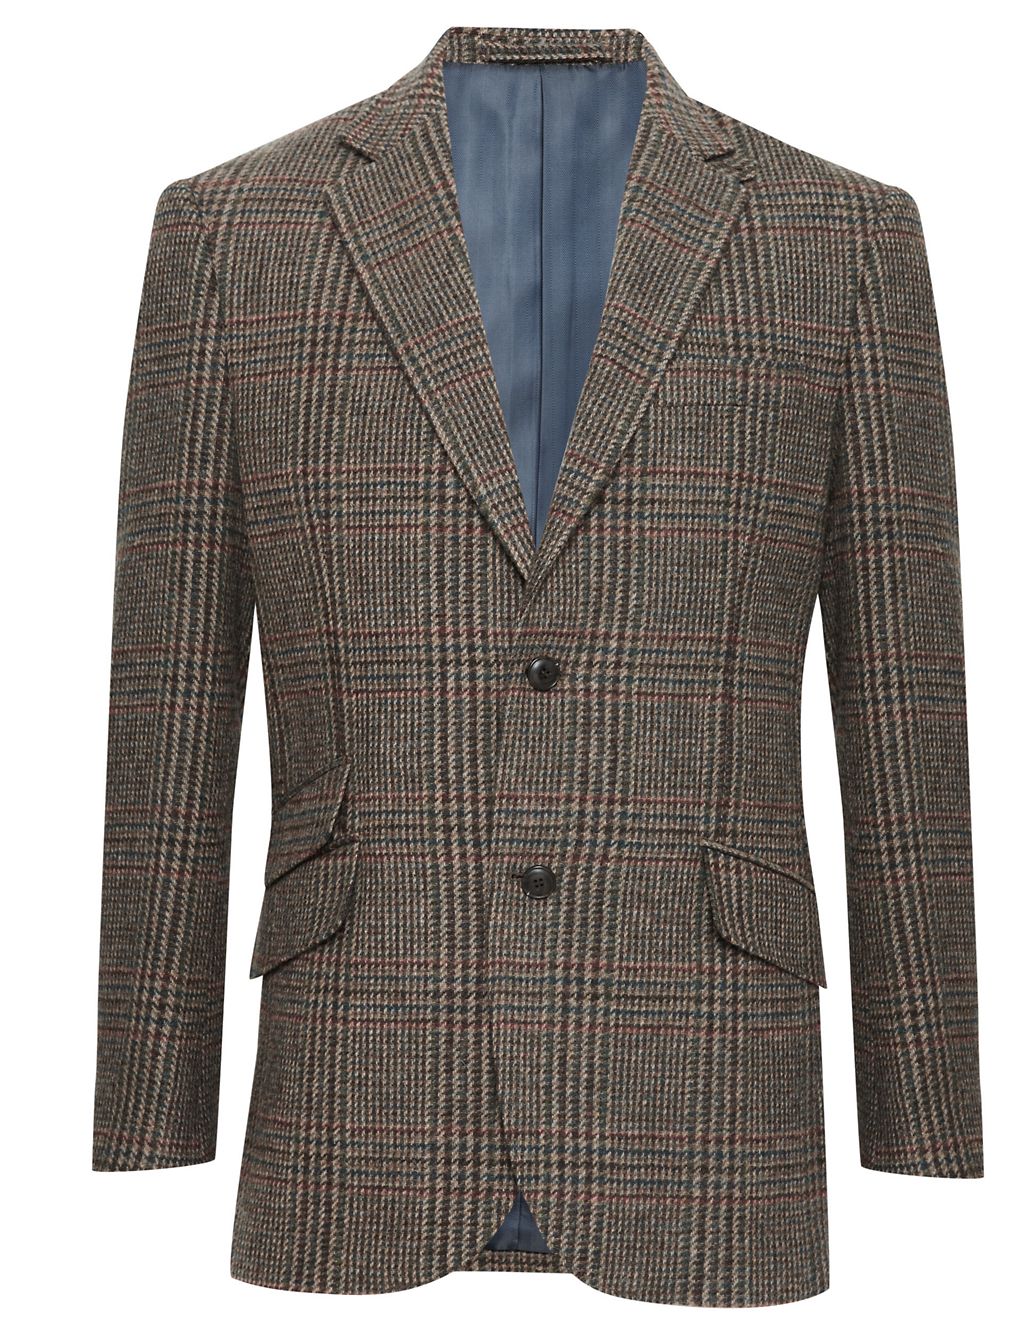 Luxury Pure New Wool 2 Button Multi-Checked Jacket 2 of 6